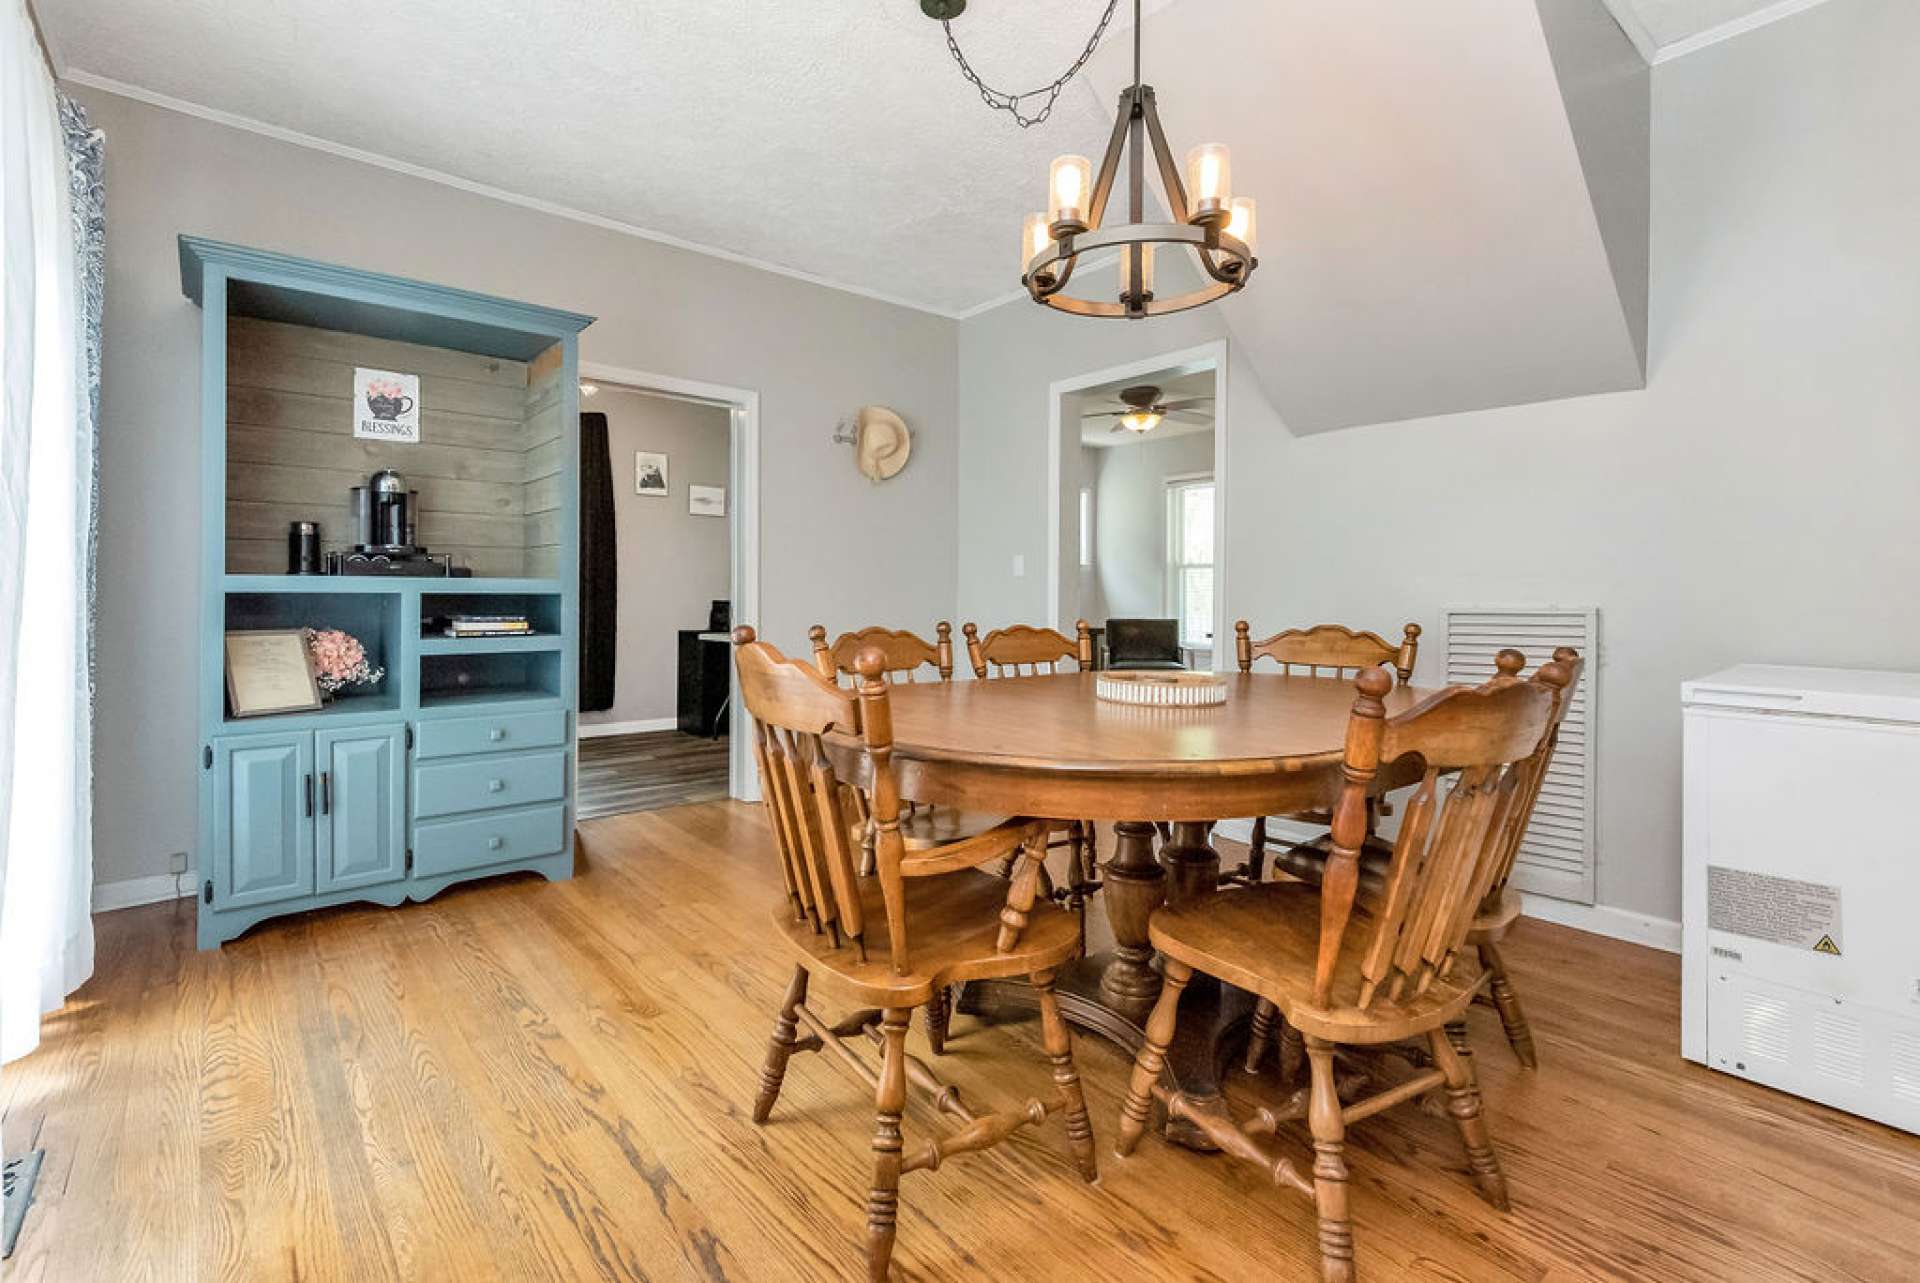 You will be hosting all the family holidays in this spacious dining room!